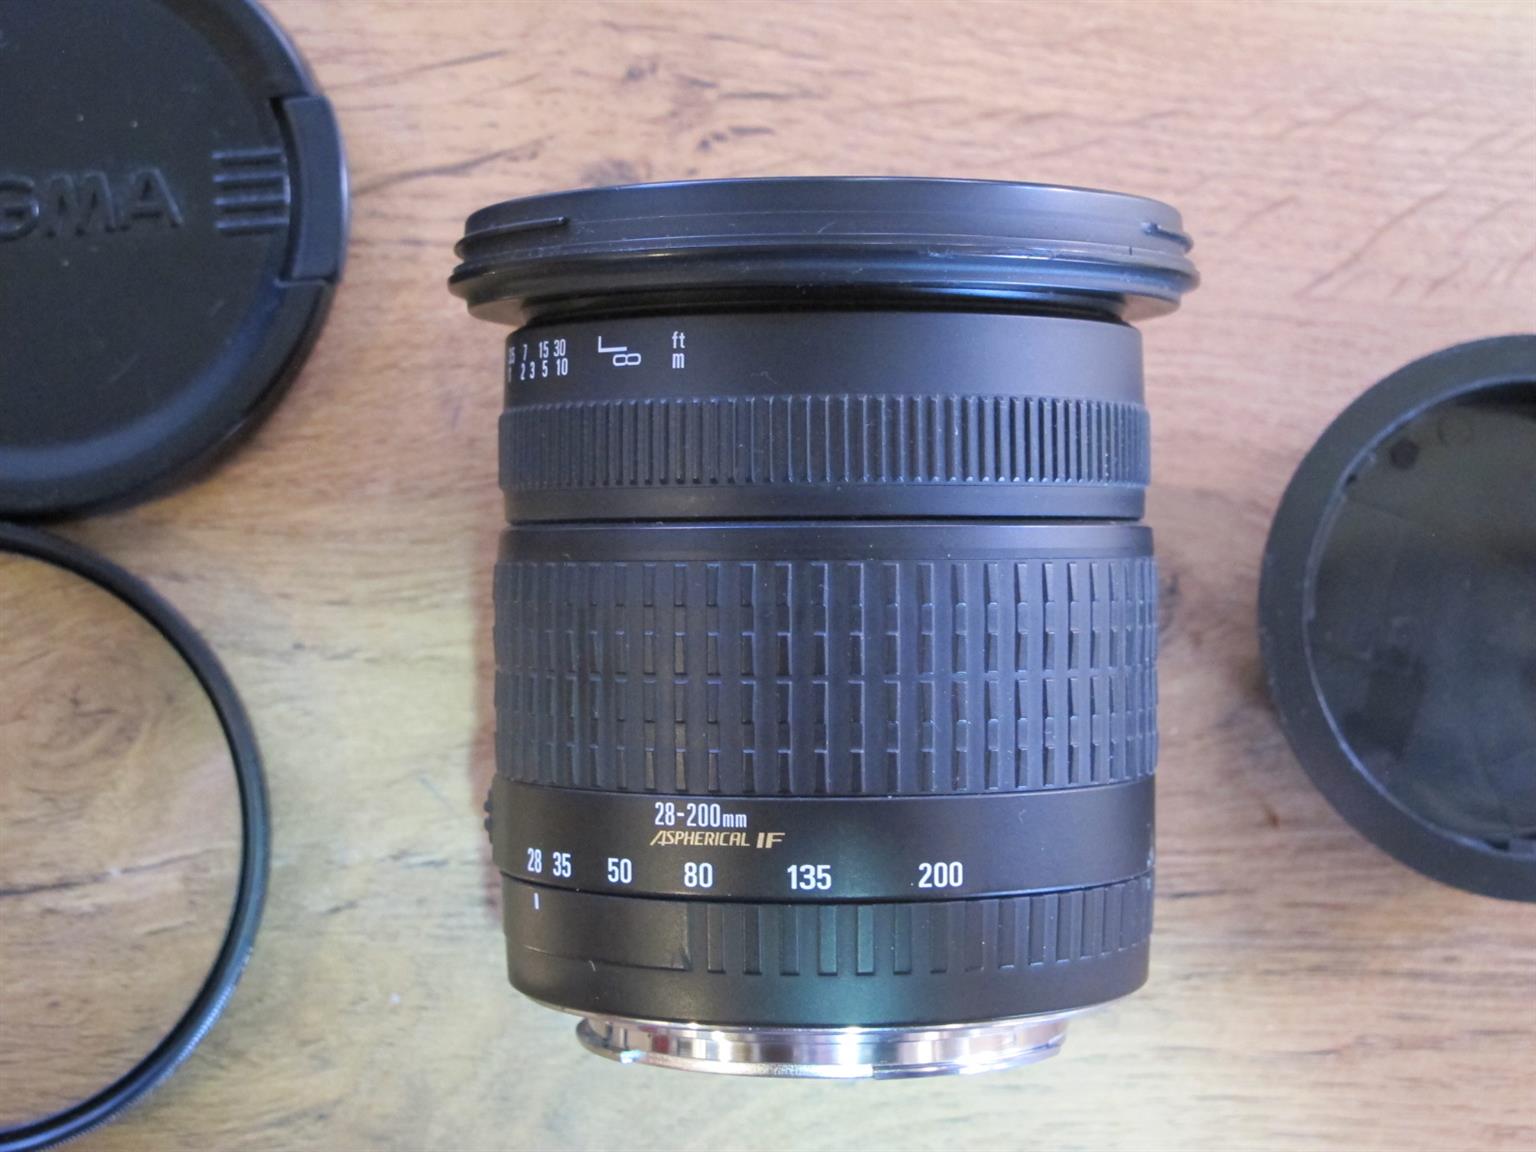 Sigma 28 - 200mm Aspherical Zoom Lens for Canon with UV Filter